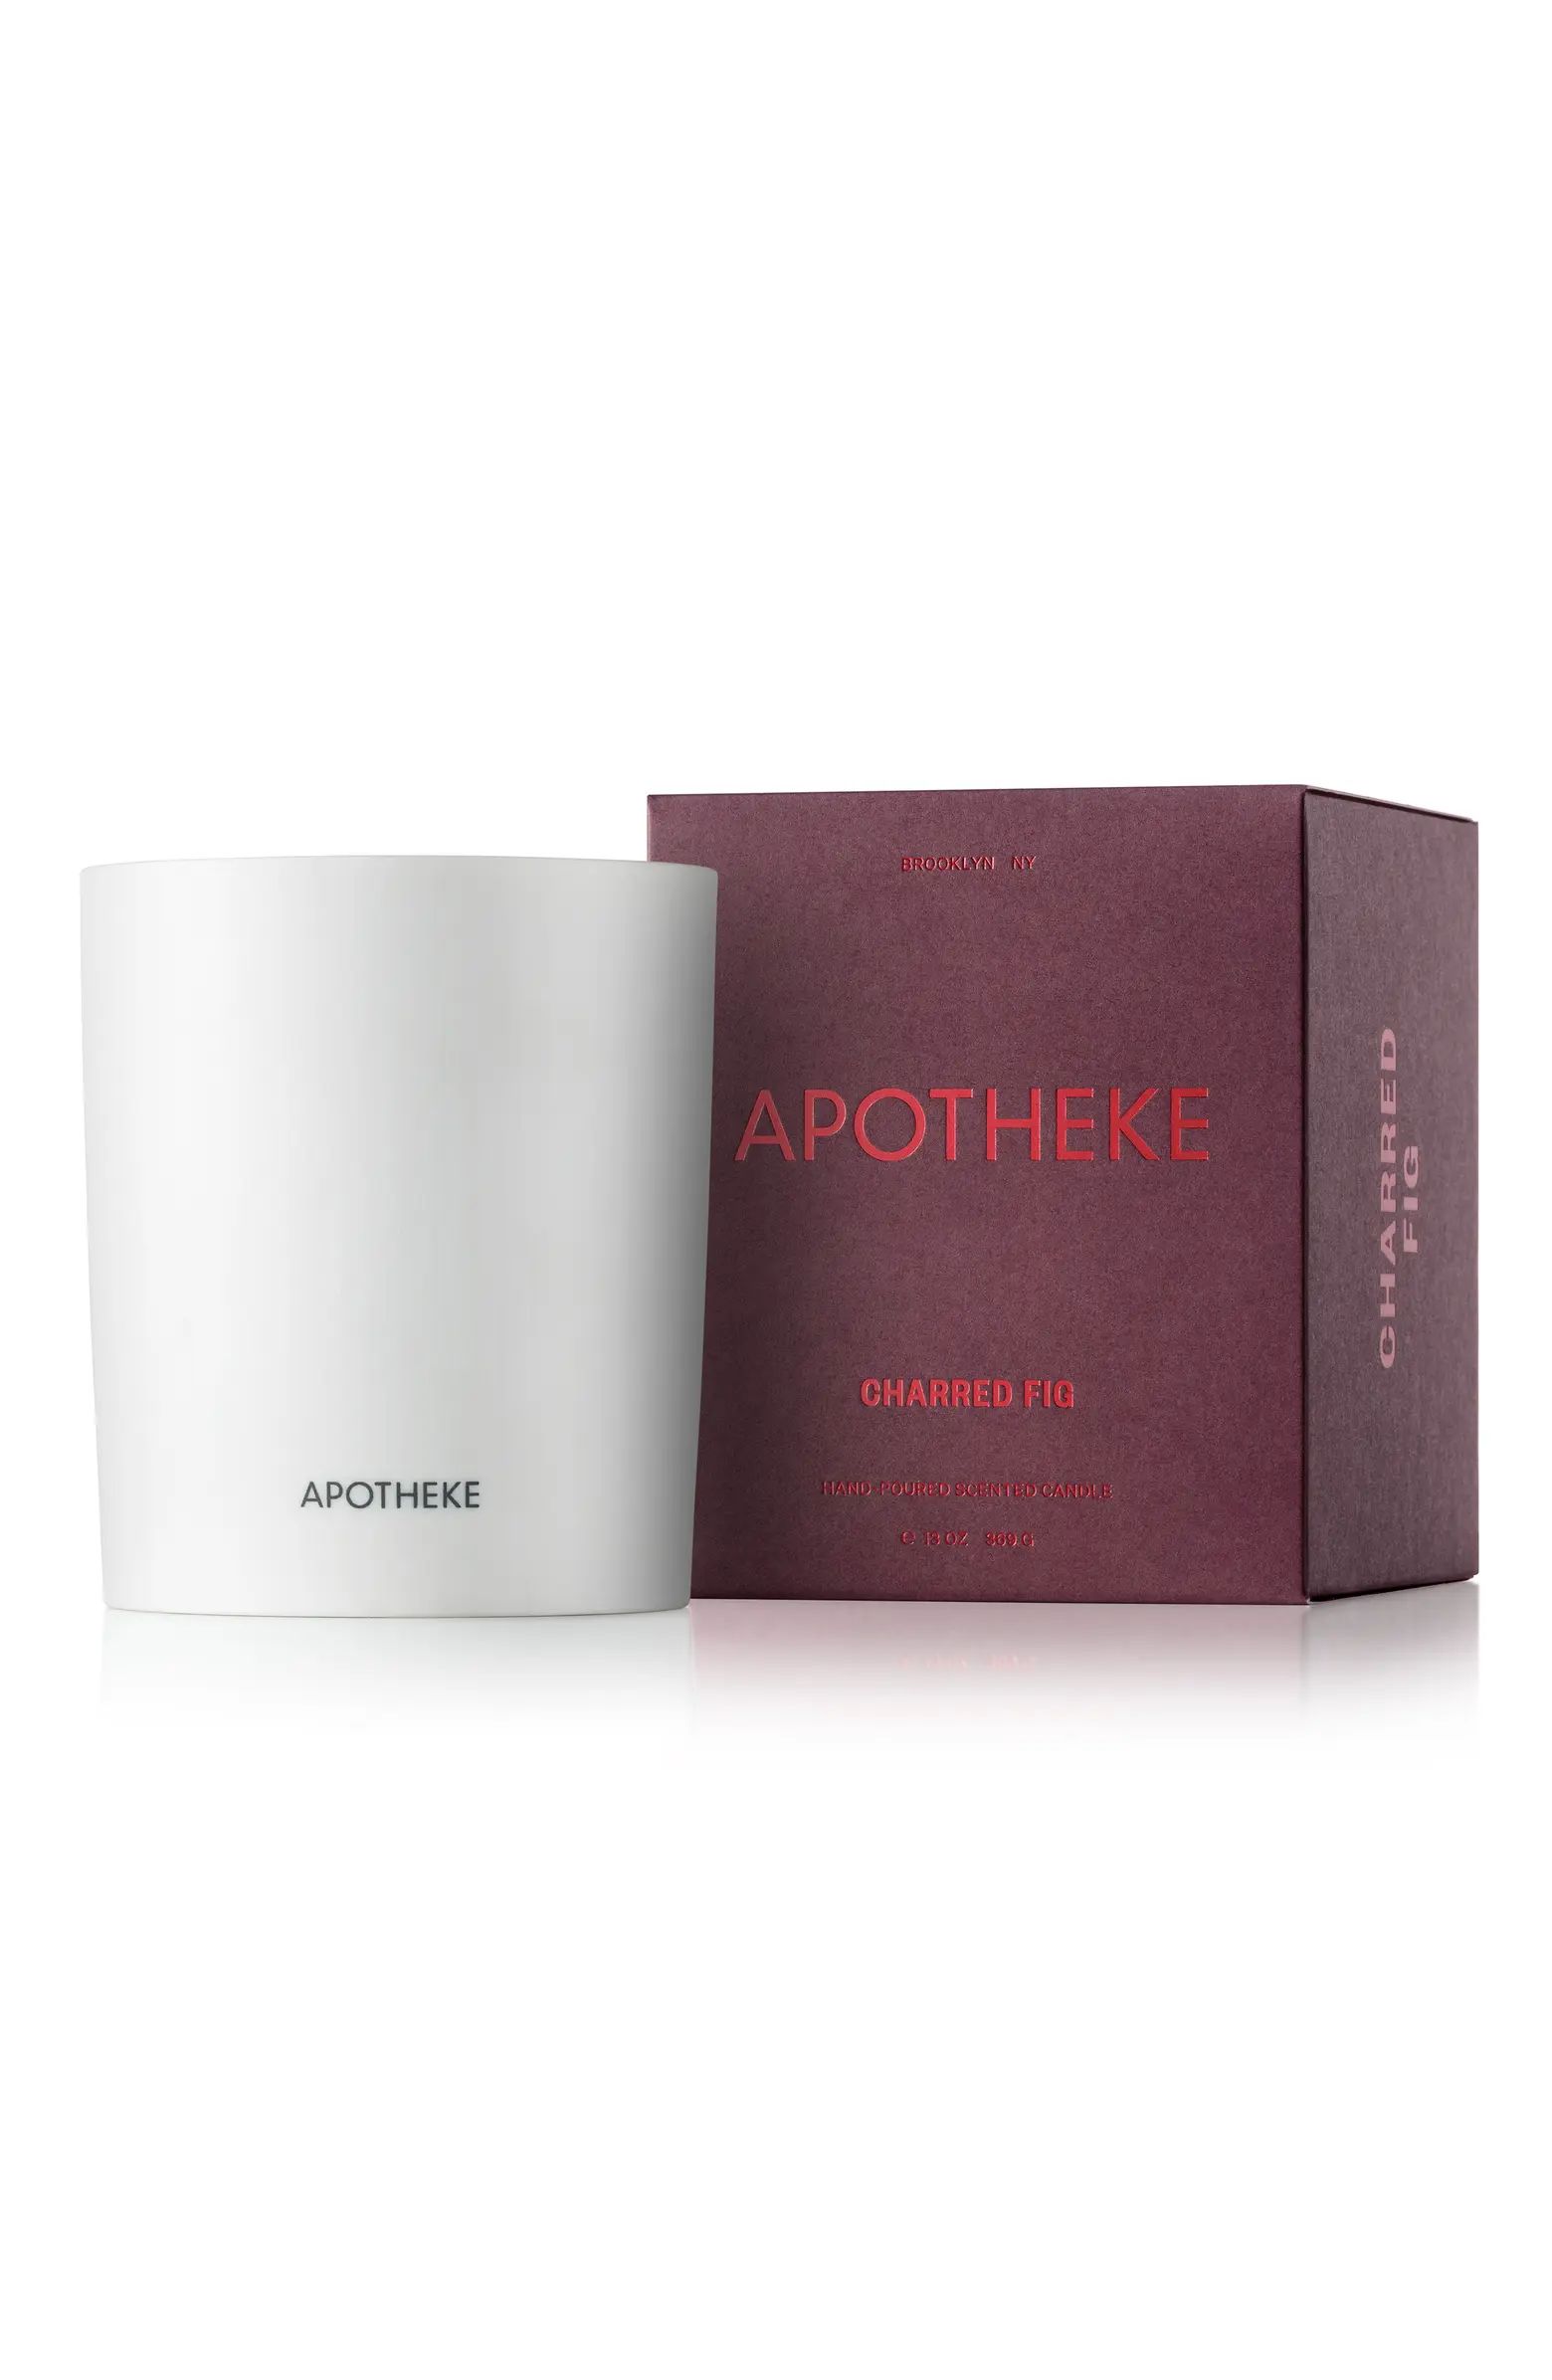 APOTHEKE Charred Fig Holiday Candle | Nordstrom | Nordstrom